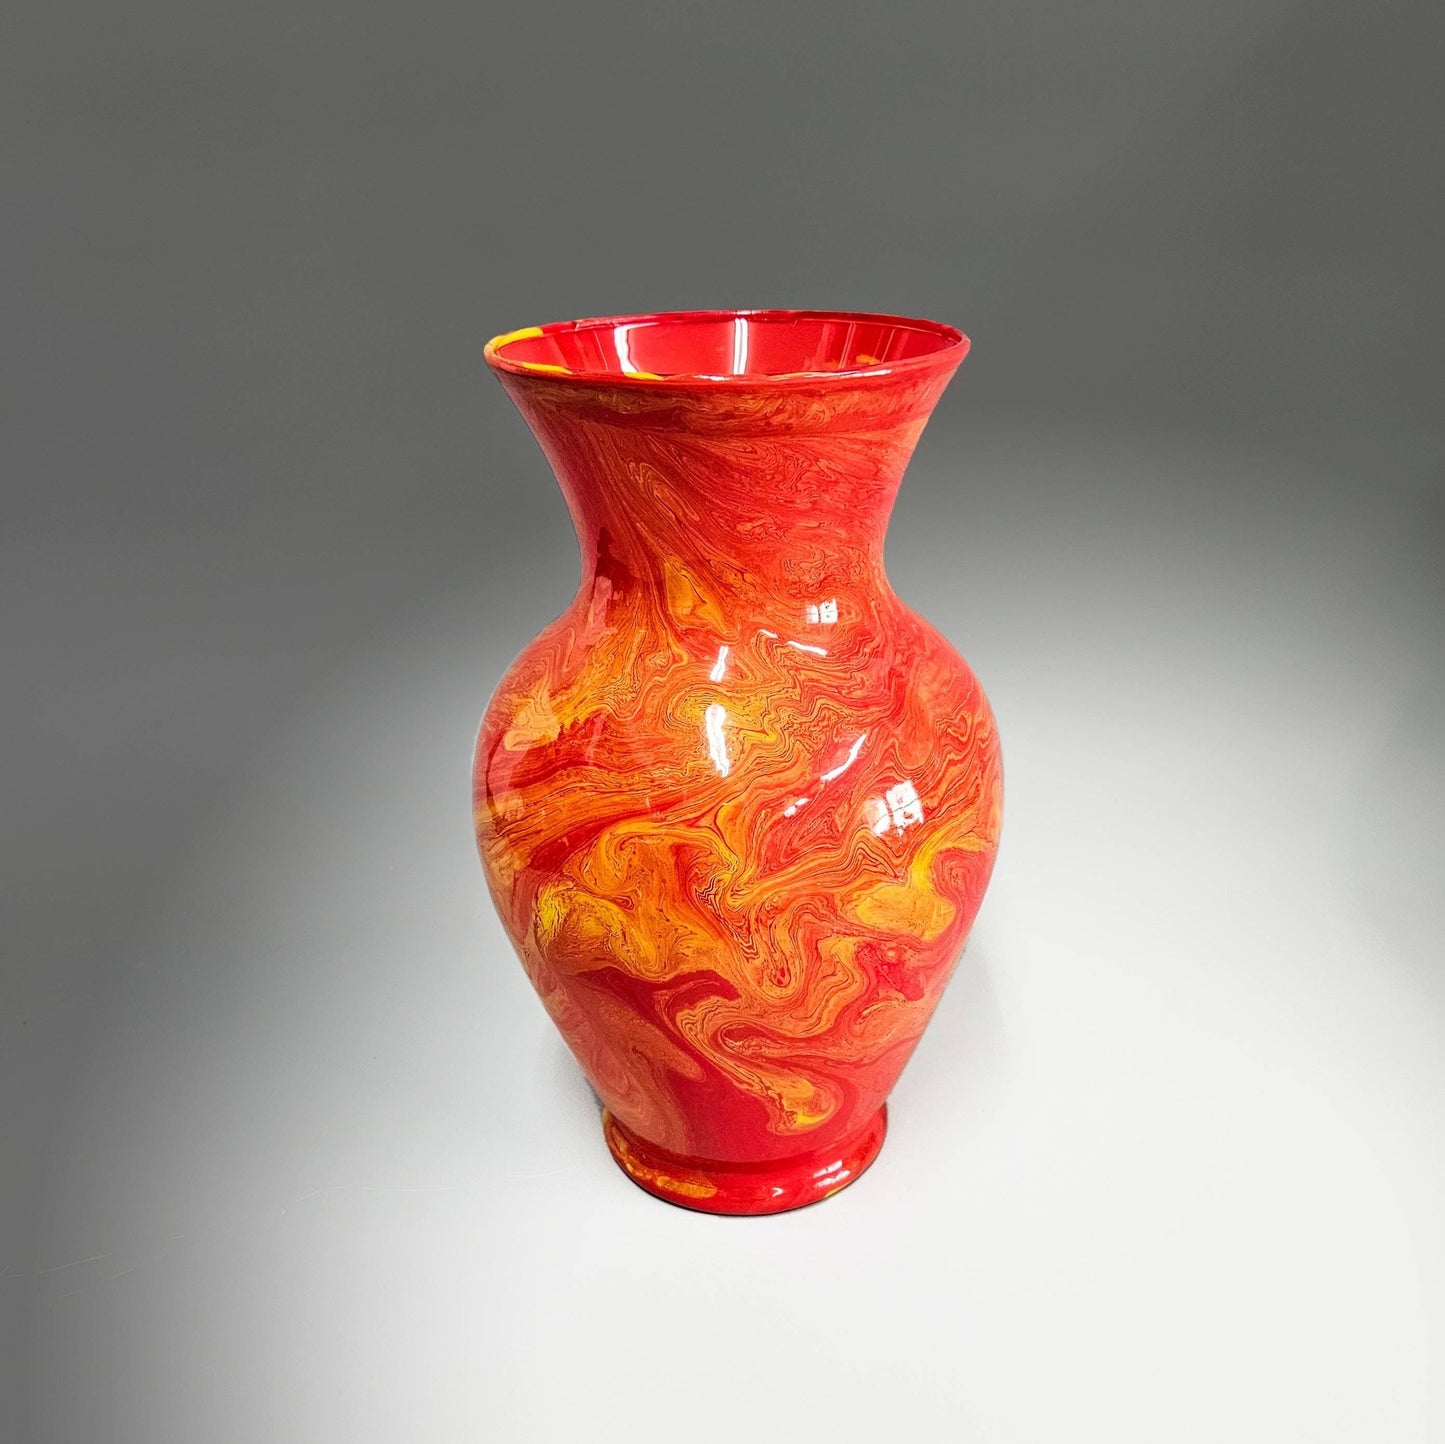 Fall Colors Painted Vase in Red Orange Yellow